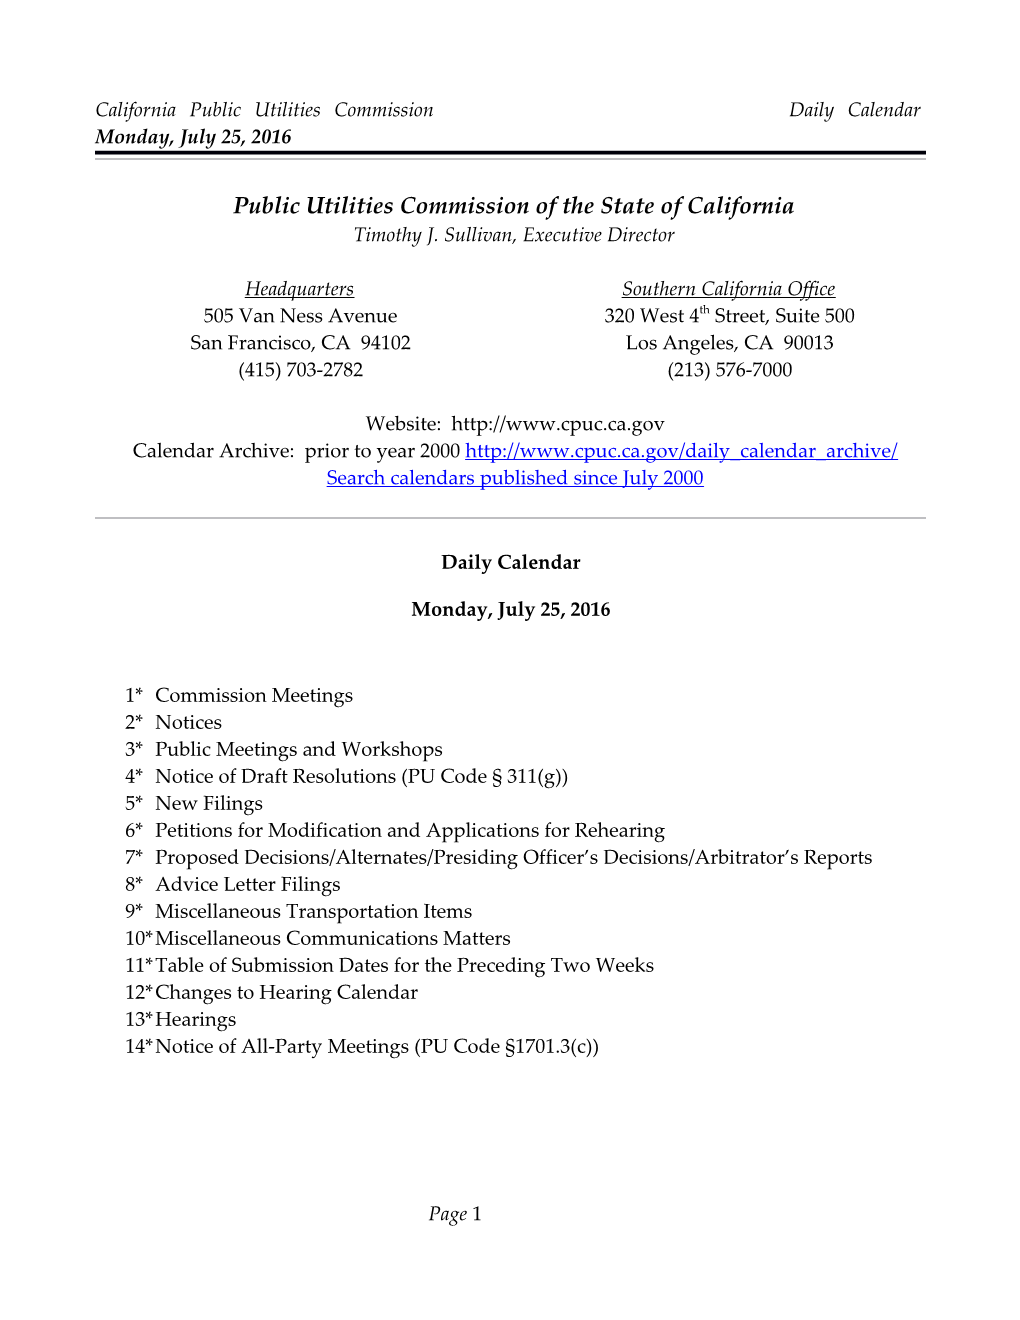 California Public Utilities Commission Daily Calendar Monday, July25, 2016